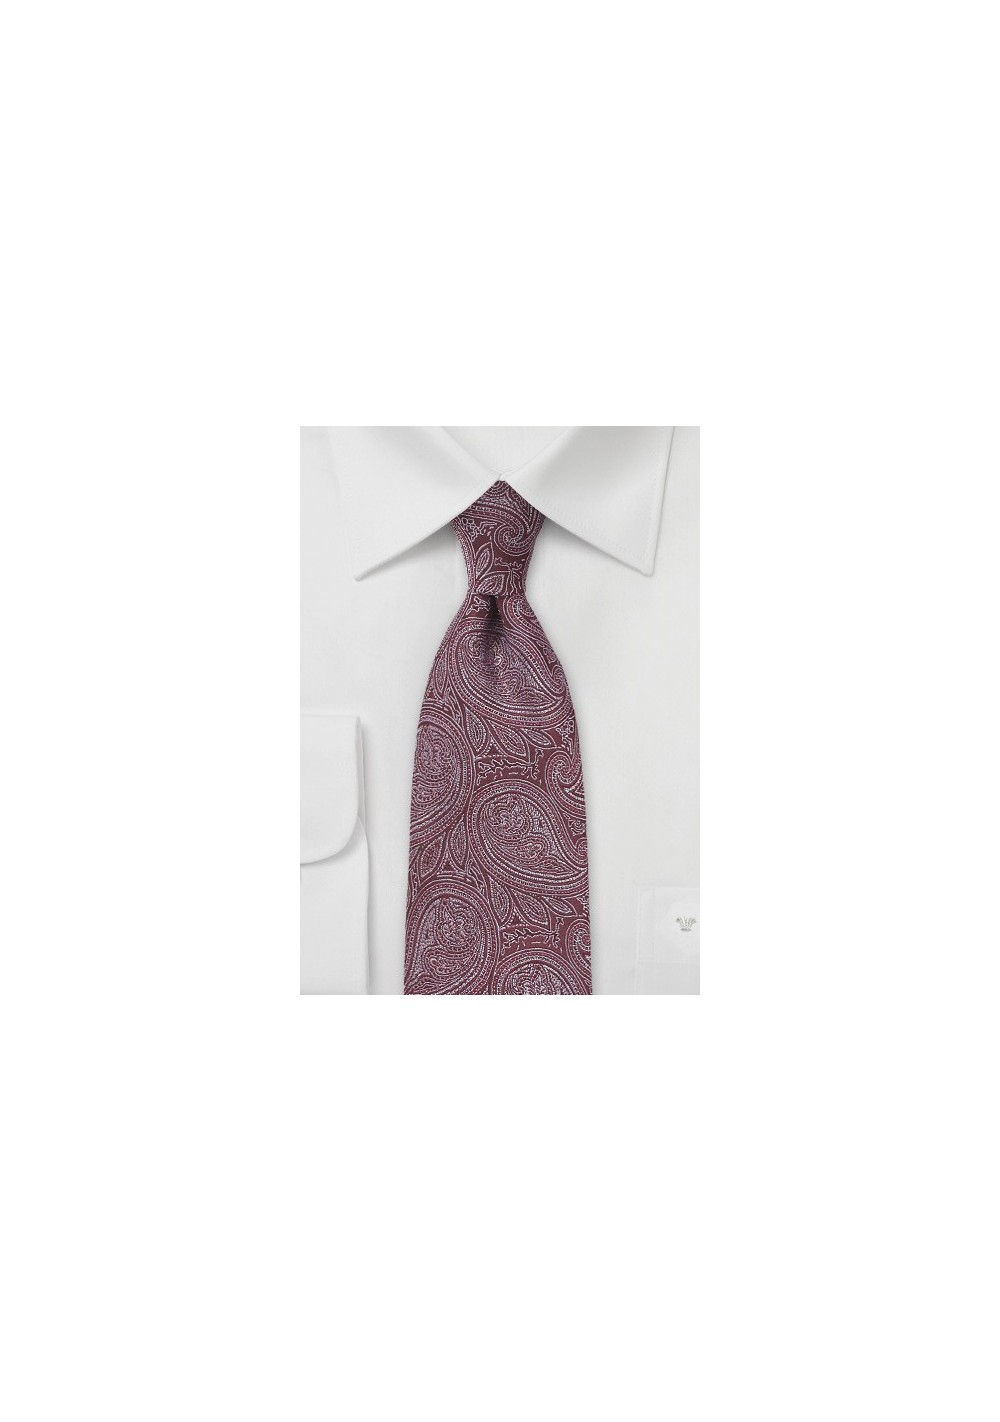 Designer Paisley Tie in Burgundy and Silver